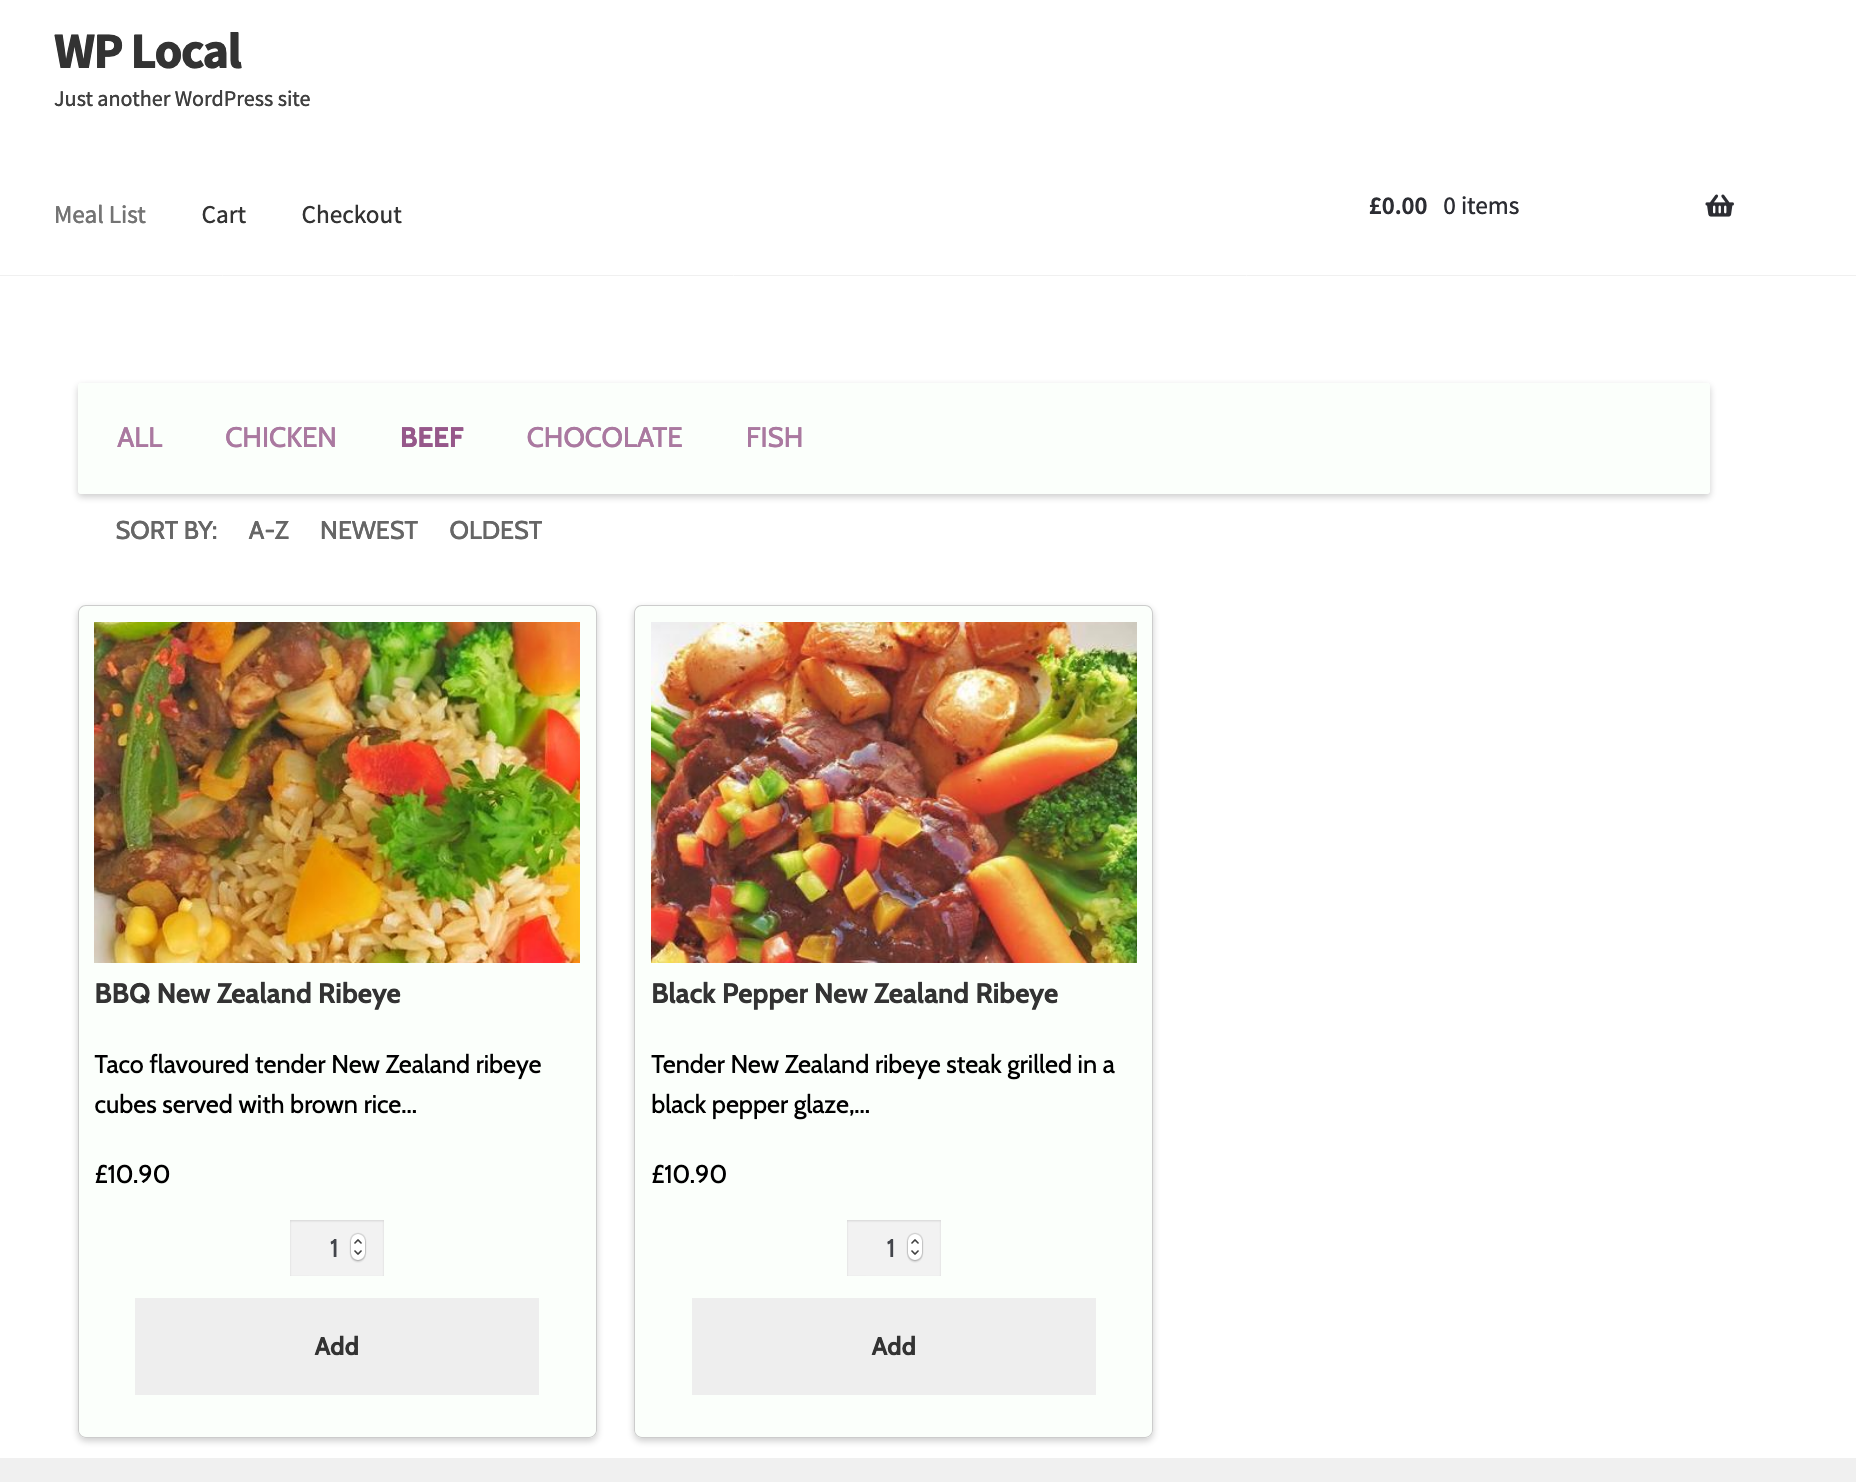 Display meals on your site